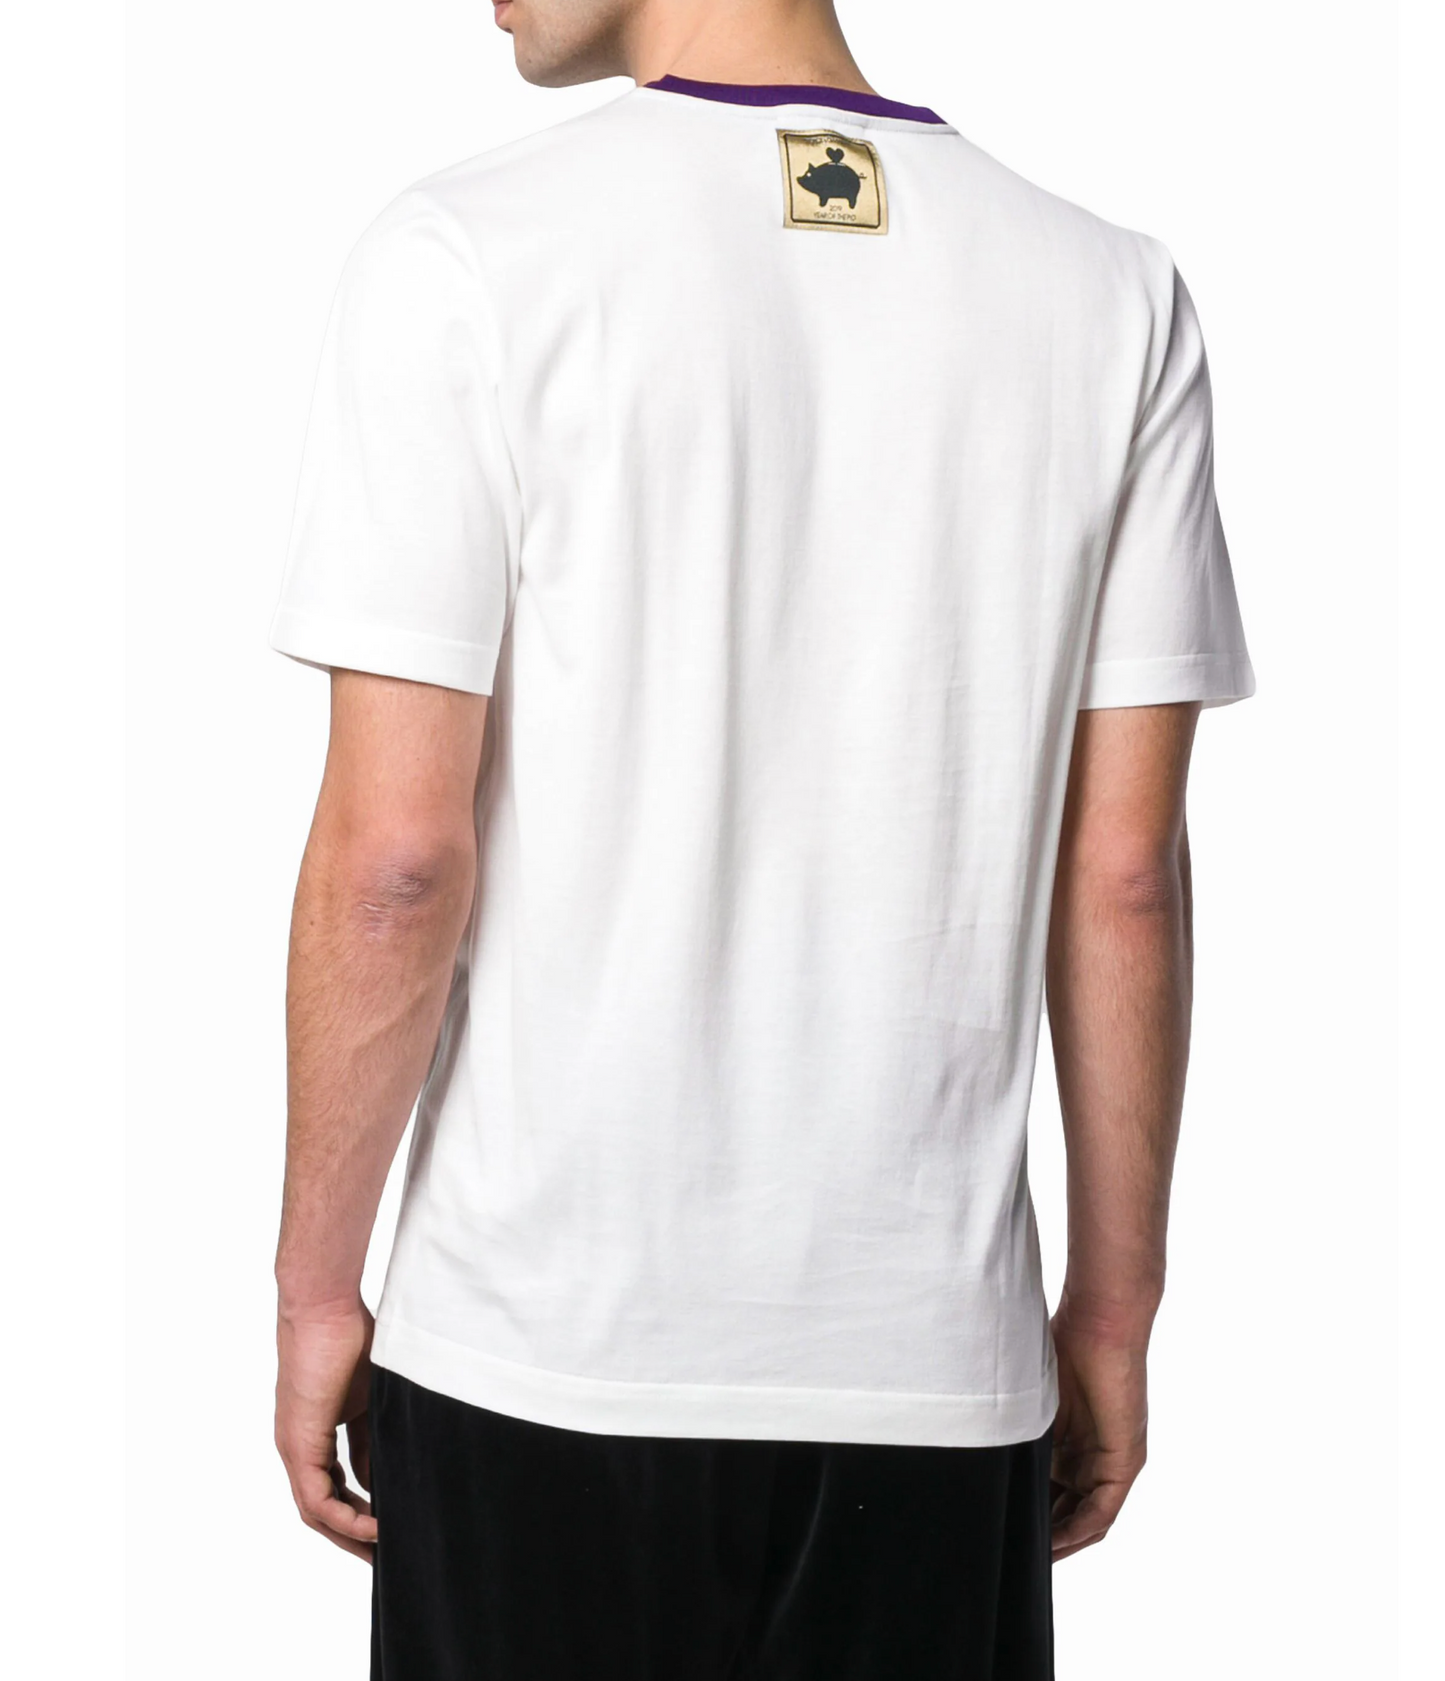 Elegant White Cotton T-Shirt - Made in Italy